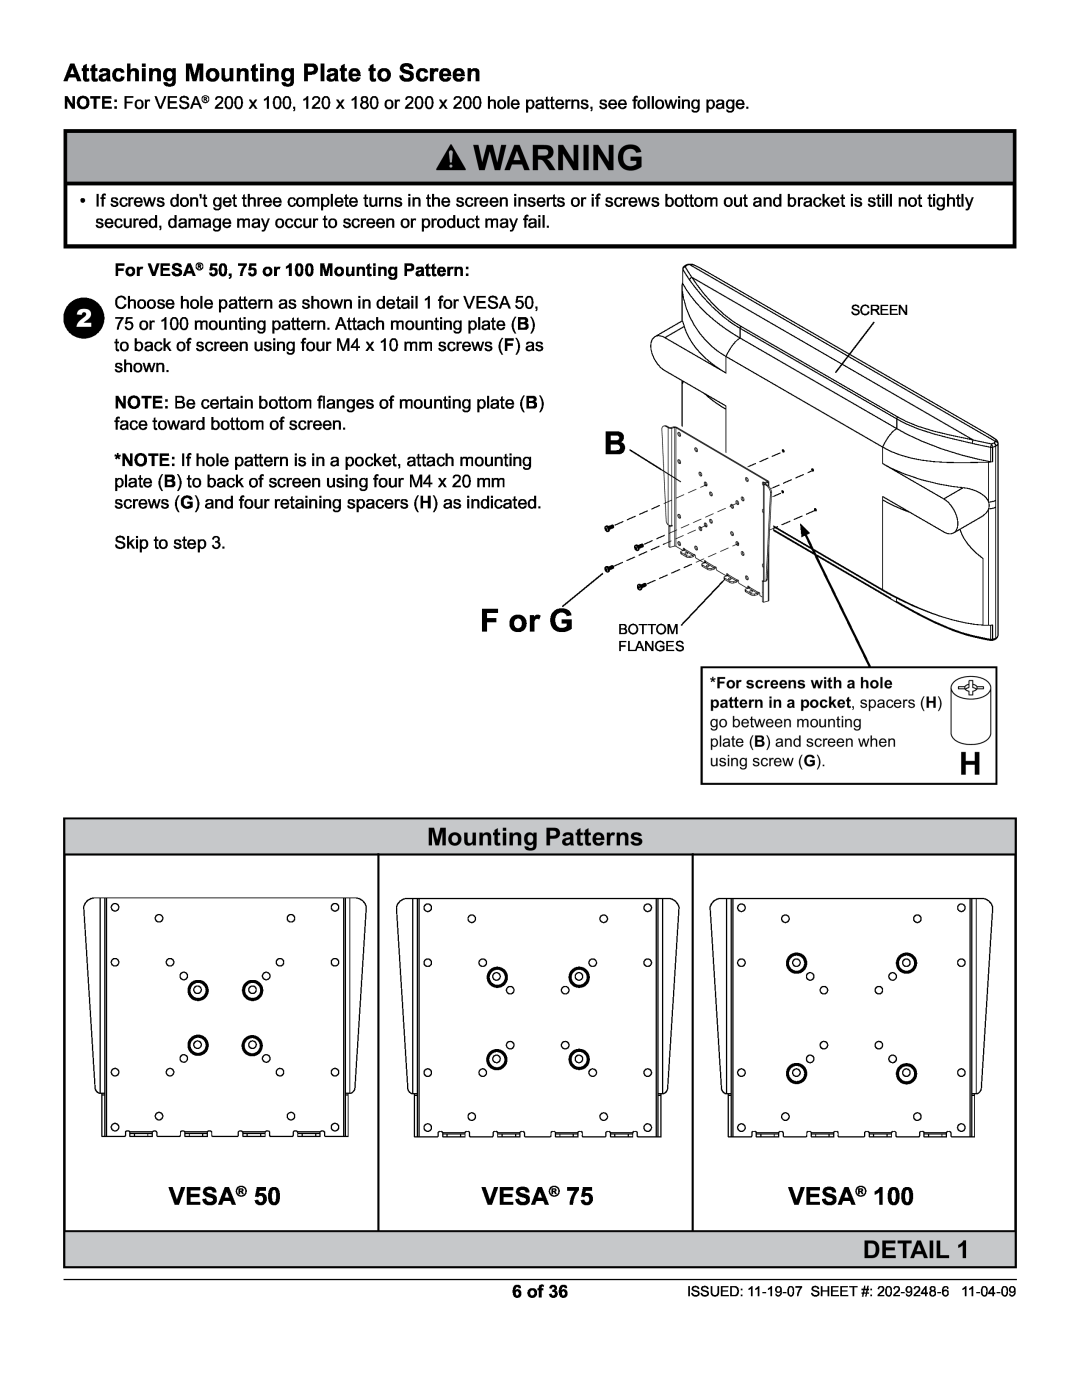 Peerless Industries PF632 manual F or G BOTTOM, Attaching Mounting Plate to Screen, Mounting Patterns, Vesa, Detail, 6 of 